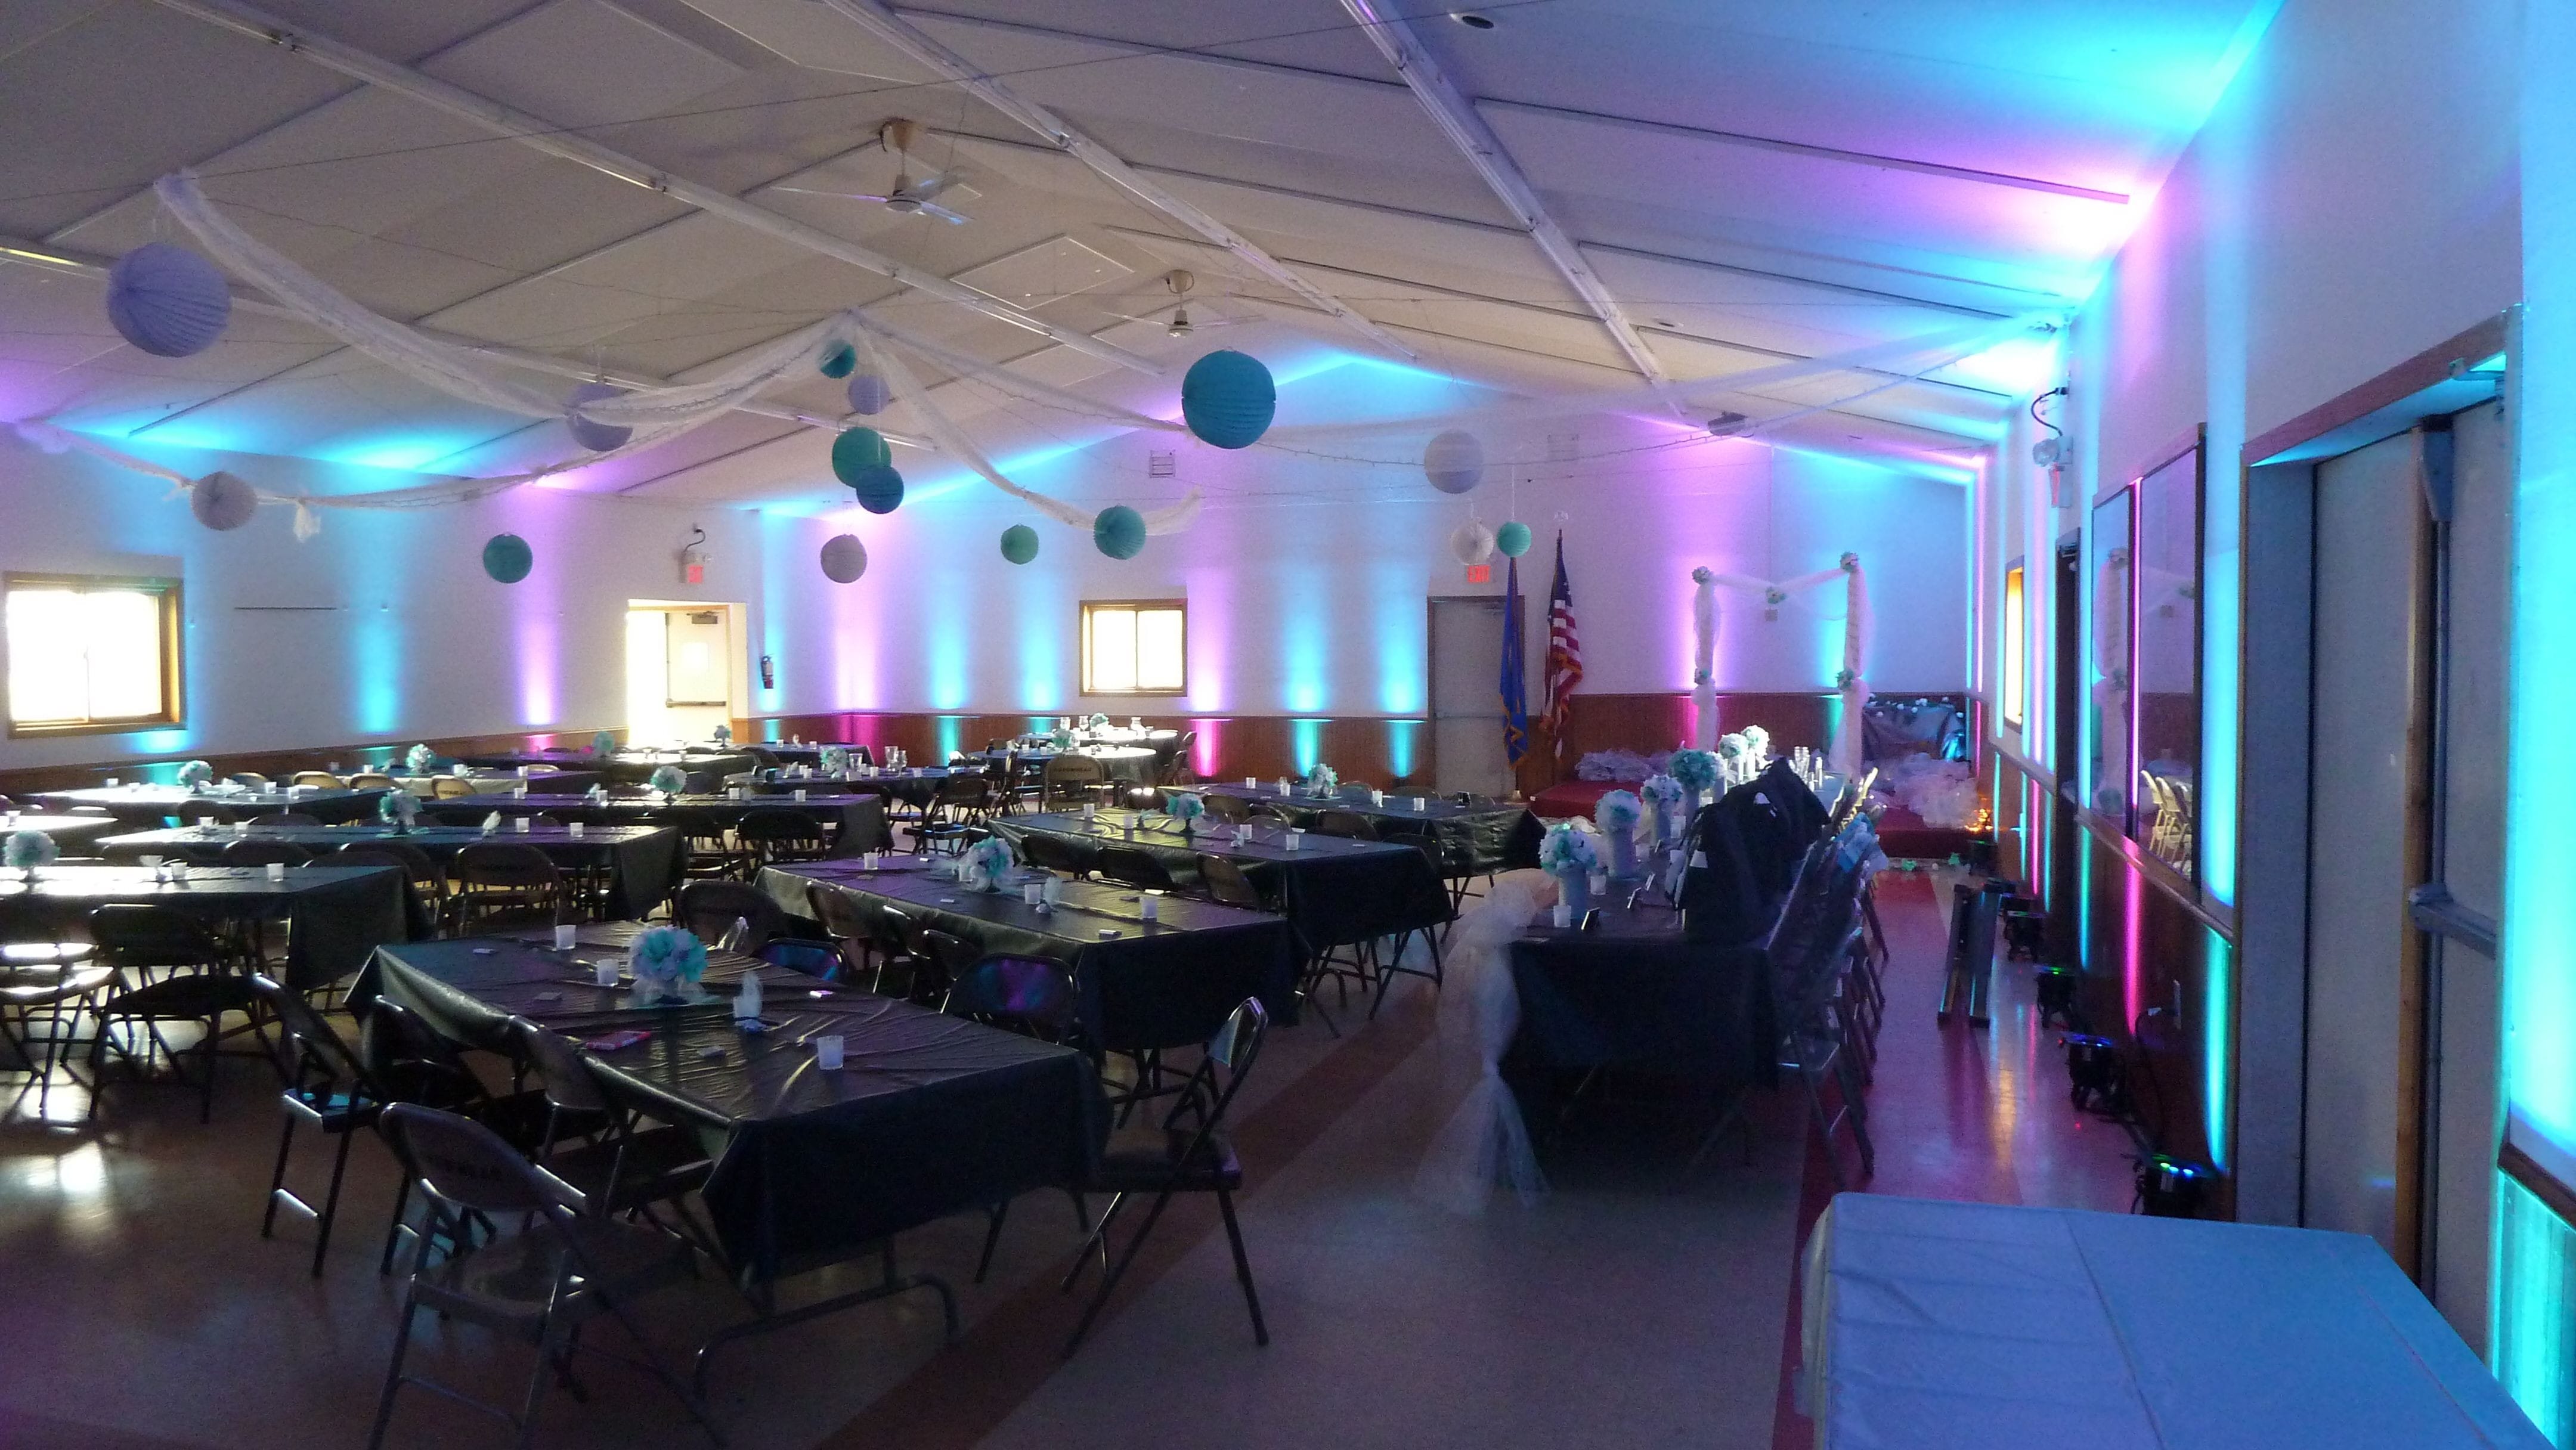 Wedding lighting at the Arrowhead Town Hall. Up lighting in a blue, teal and magenta theme.